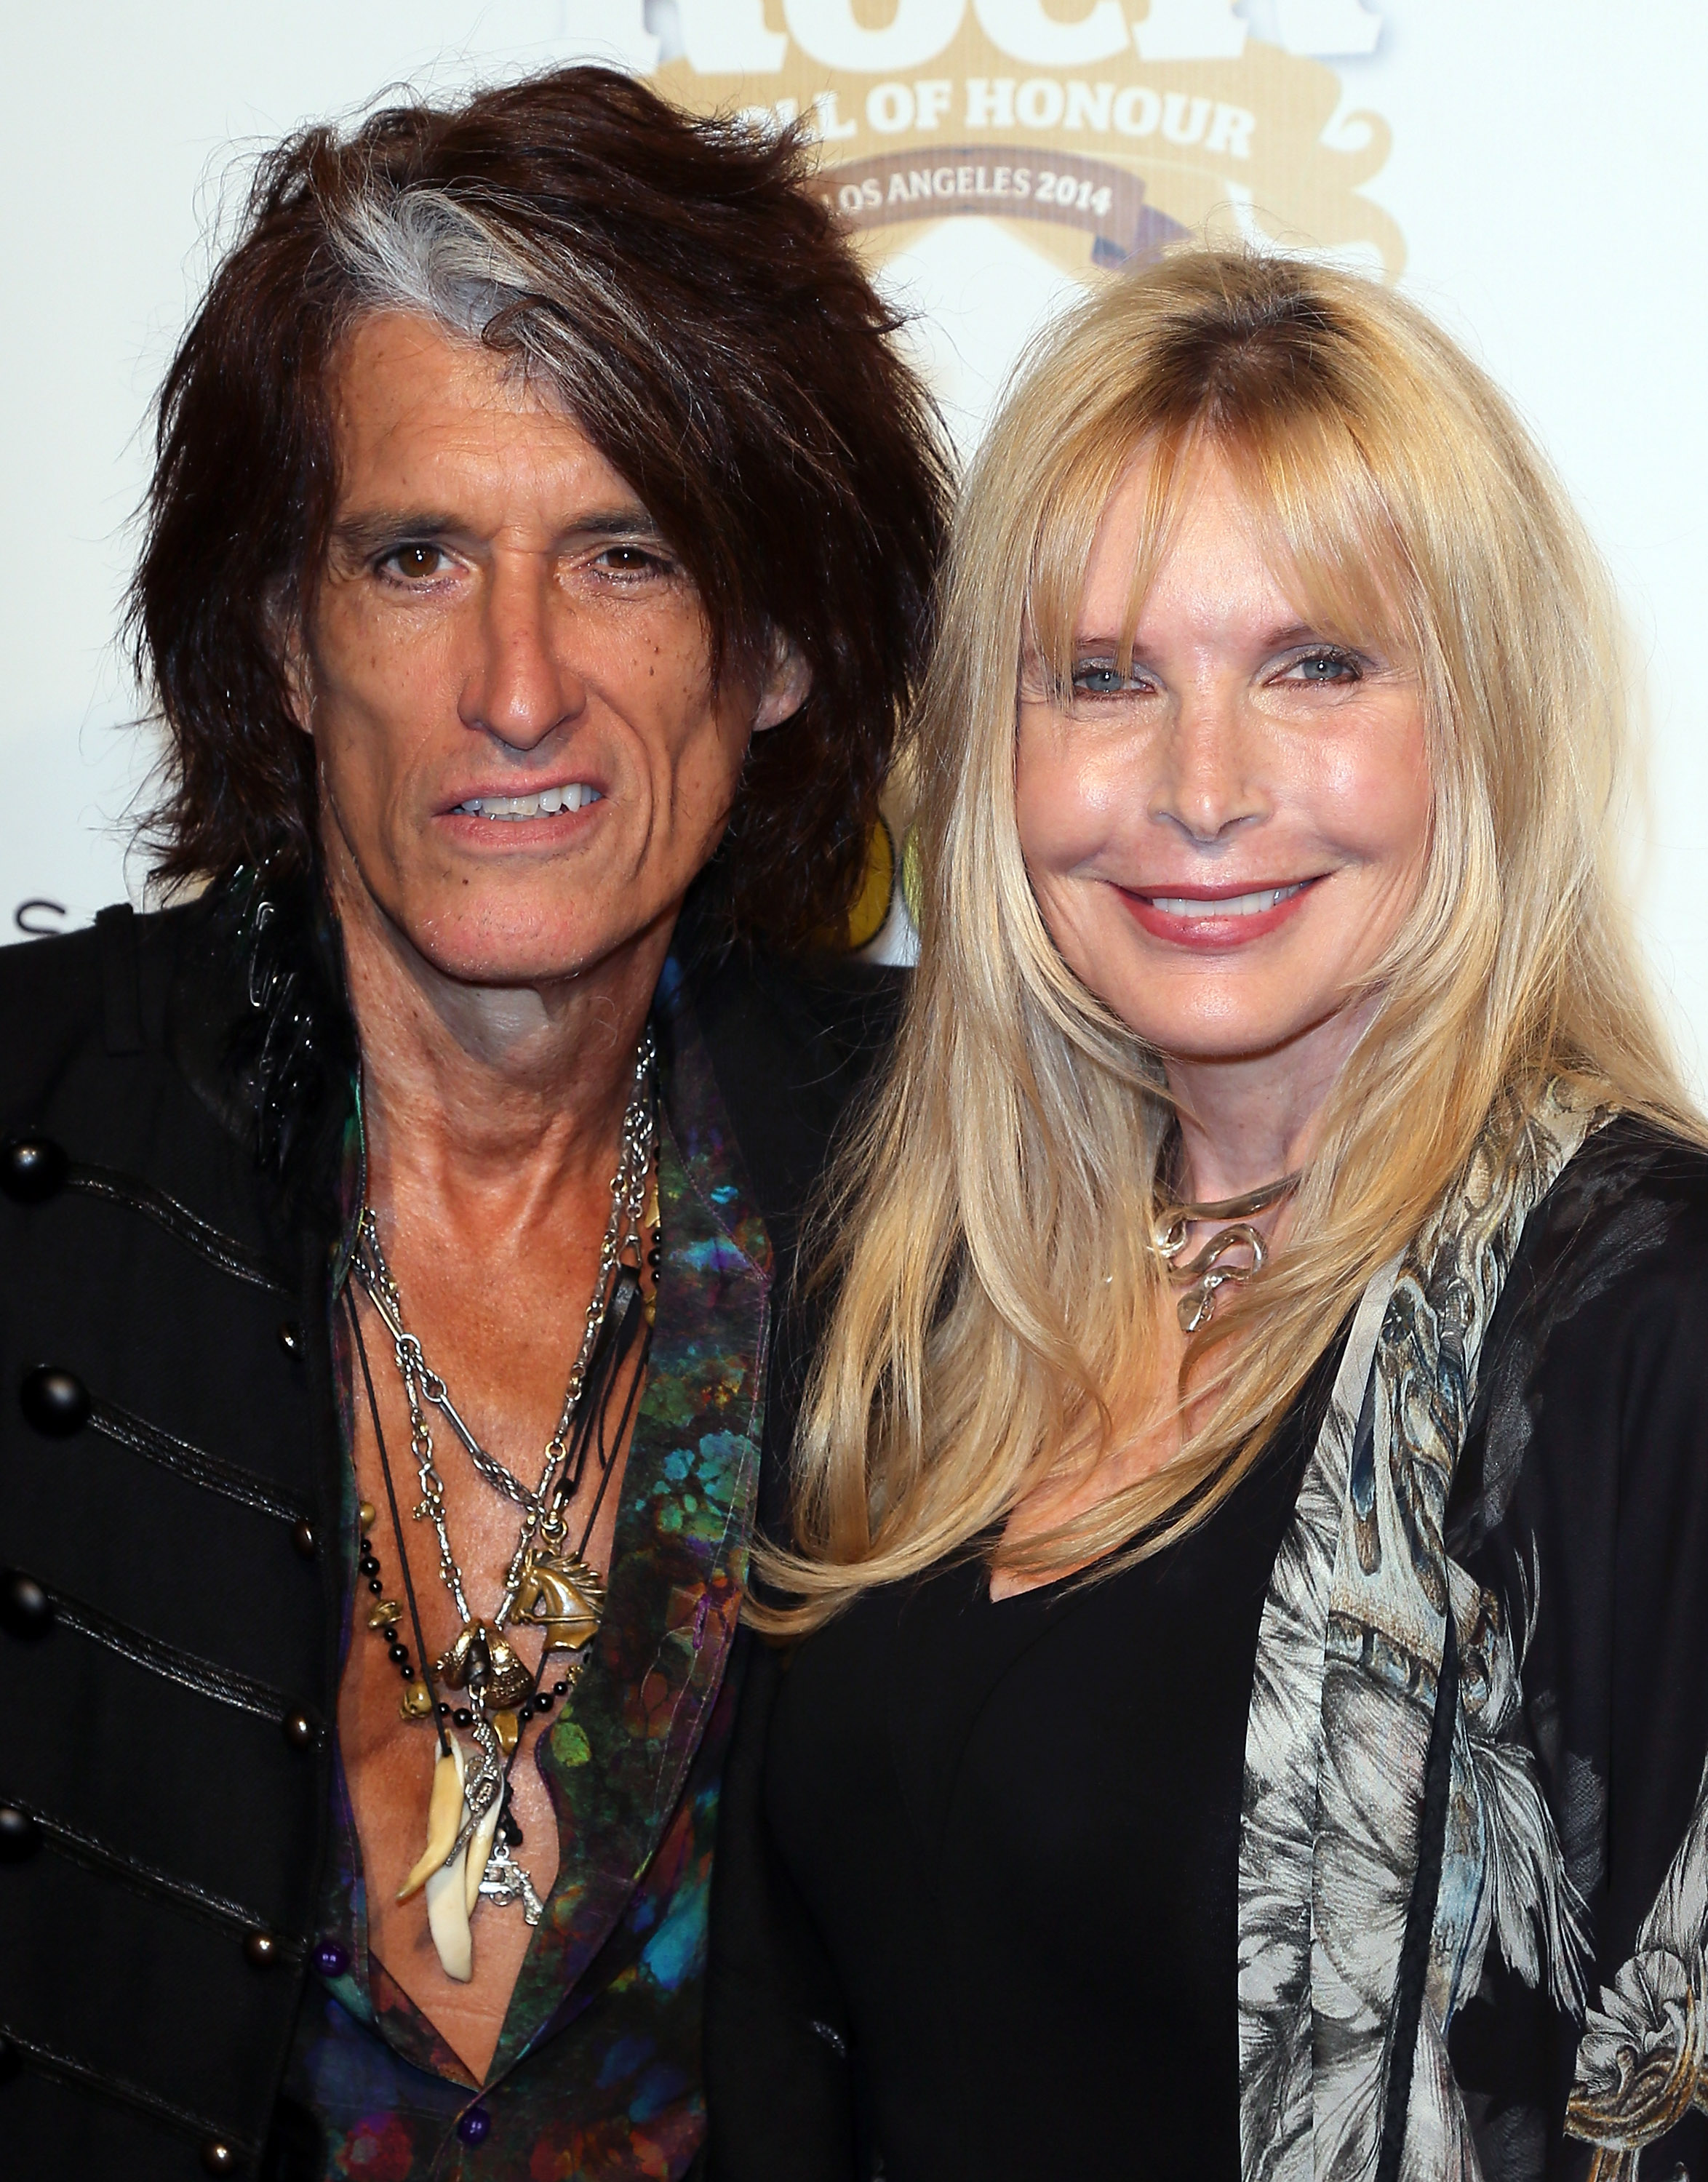 Joe Perry and Billie Paulette Montgomery at the 10th Annual Classic Rock Awards on November 4, 2014, in Hollywood, California. | Source: Getty Images